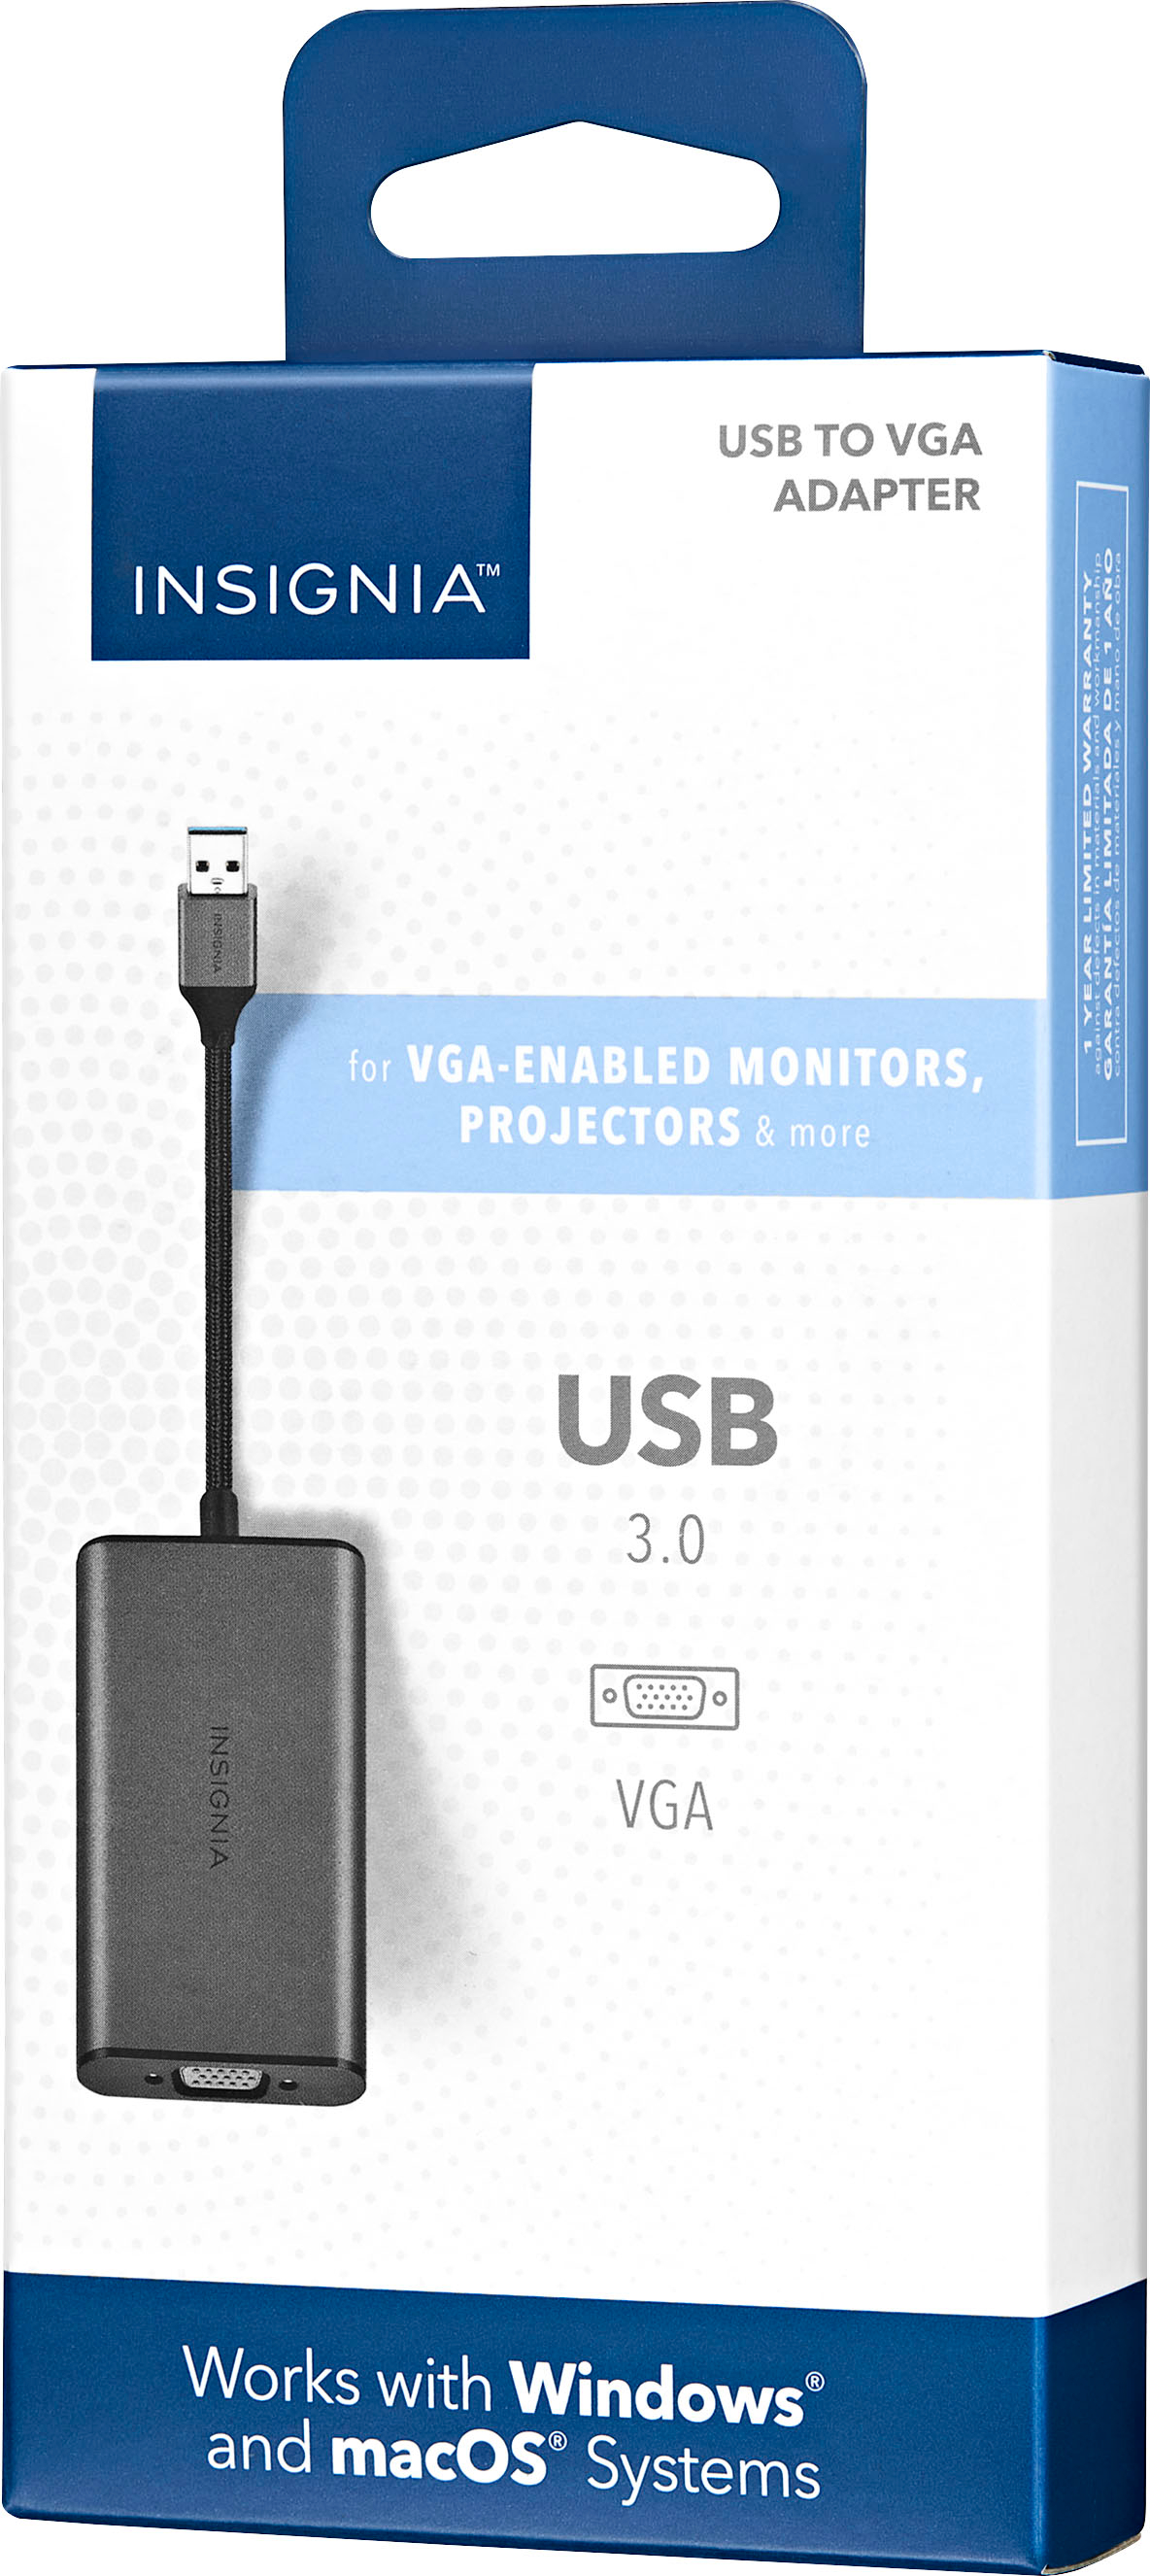 Best Buy essentials™ USB to VGA Adapter White BE-PA3UVG - Best Buy